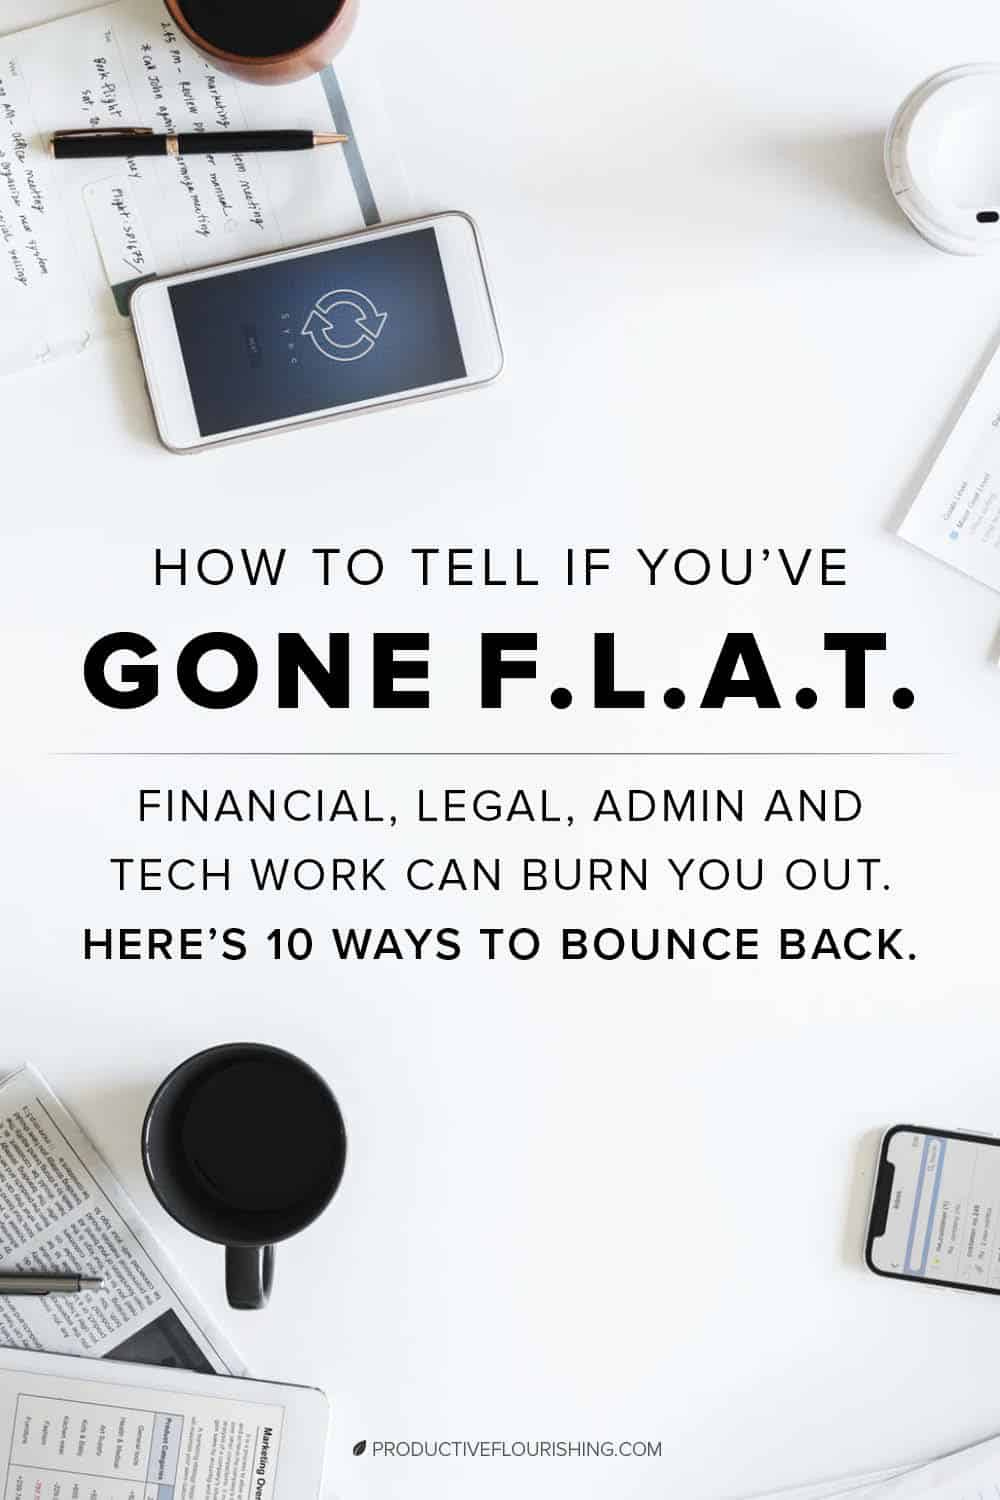 10 ways to bounce back if Financial, Legal, Admin and Tech work have burned you out. As an entrepreneur, finding ways to keep motivated is always a struggle. #smallbusinessmotivation #entrepreneur #productiveflourishing